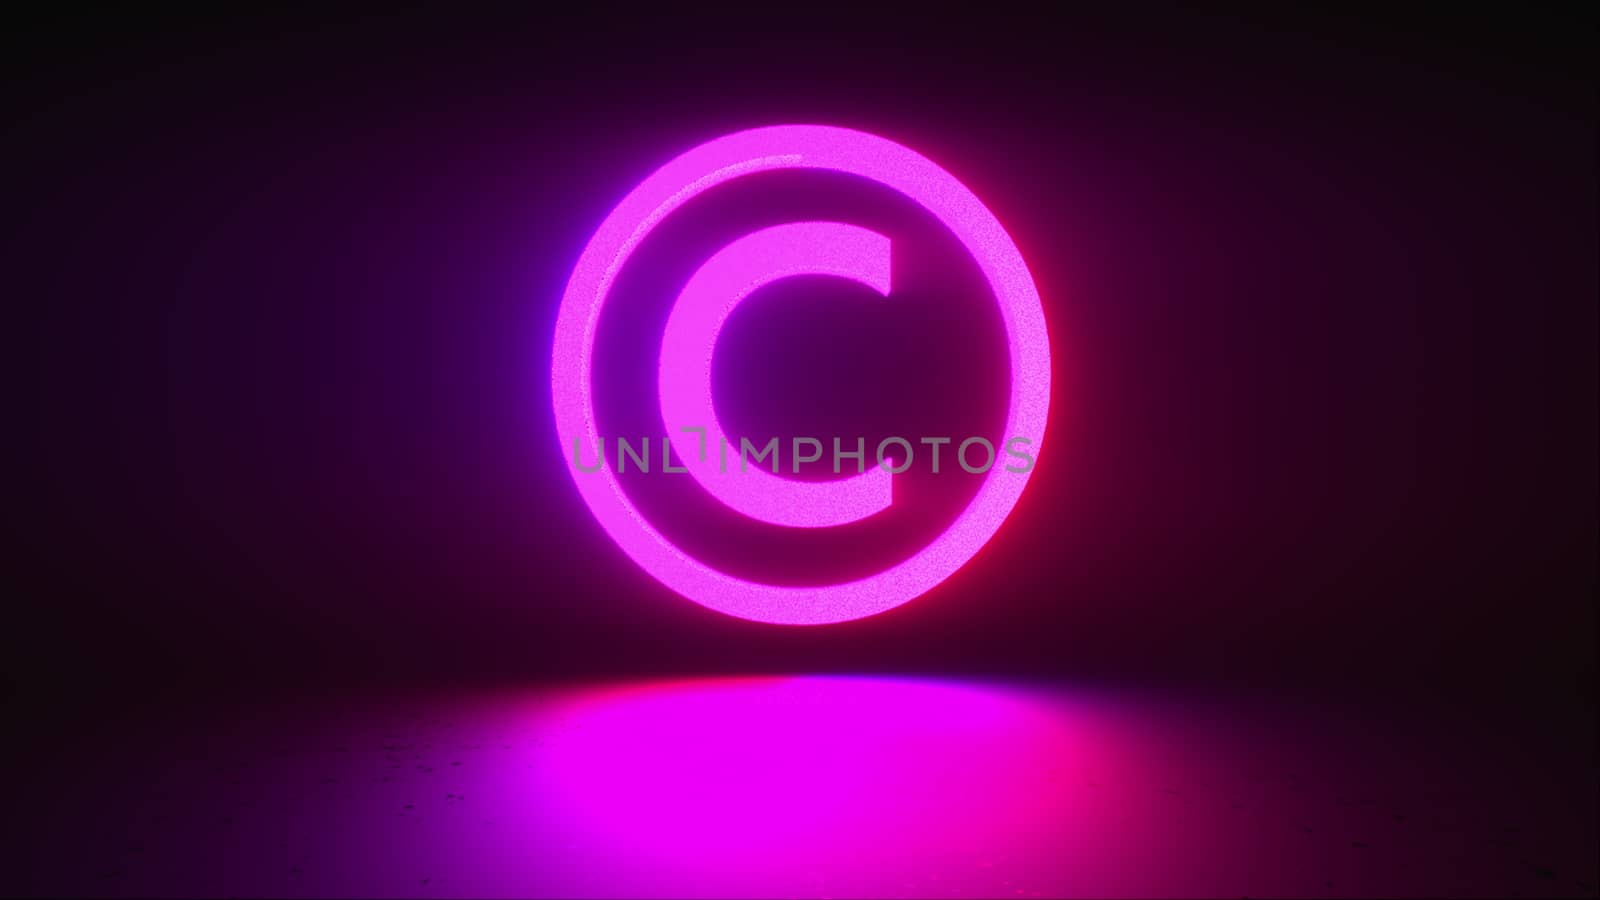 Rotating neon copyright sign on a dark background, computer generated digital symbol. 3d rendering of copyright protection by nolimit046